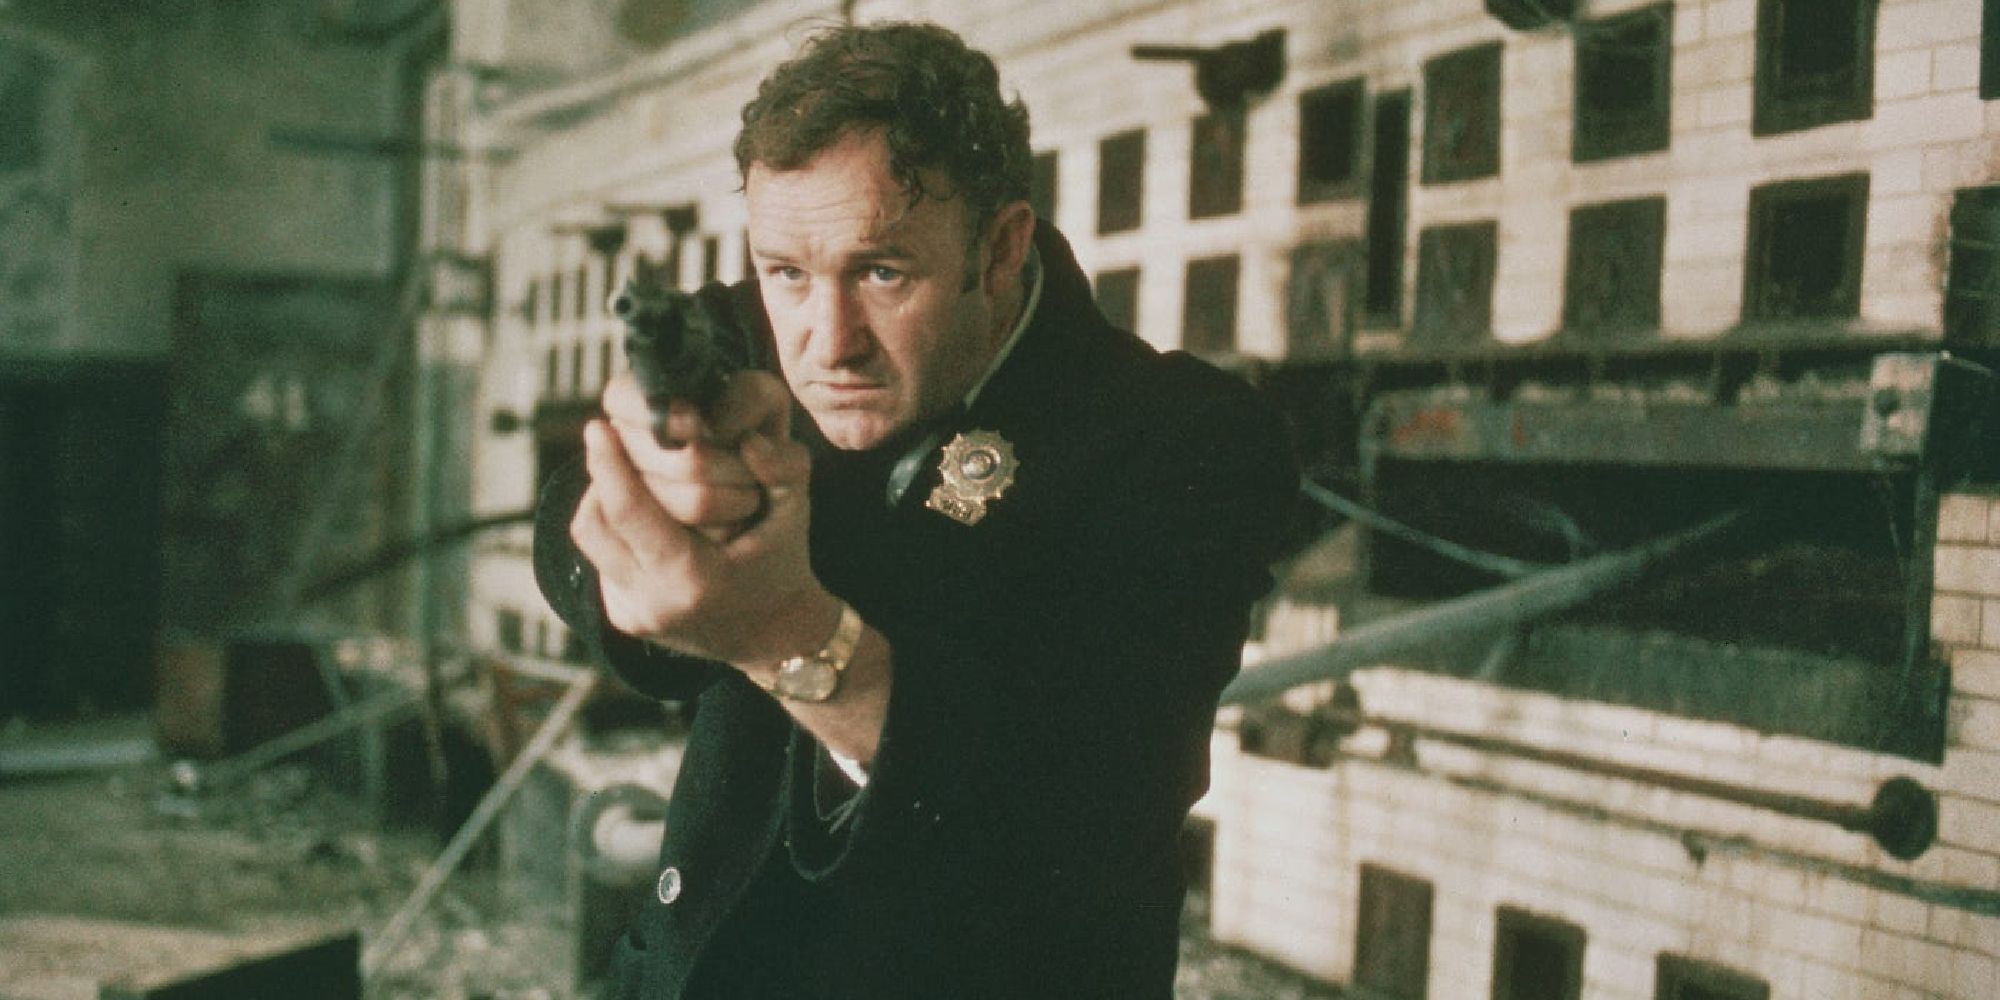 Jimmy "Popeye" Doyle, pointing a gun in William Friedkin's The French Connection (1971)